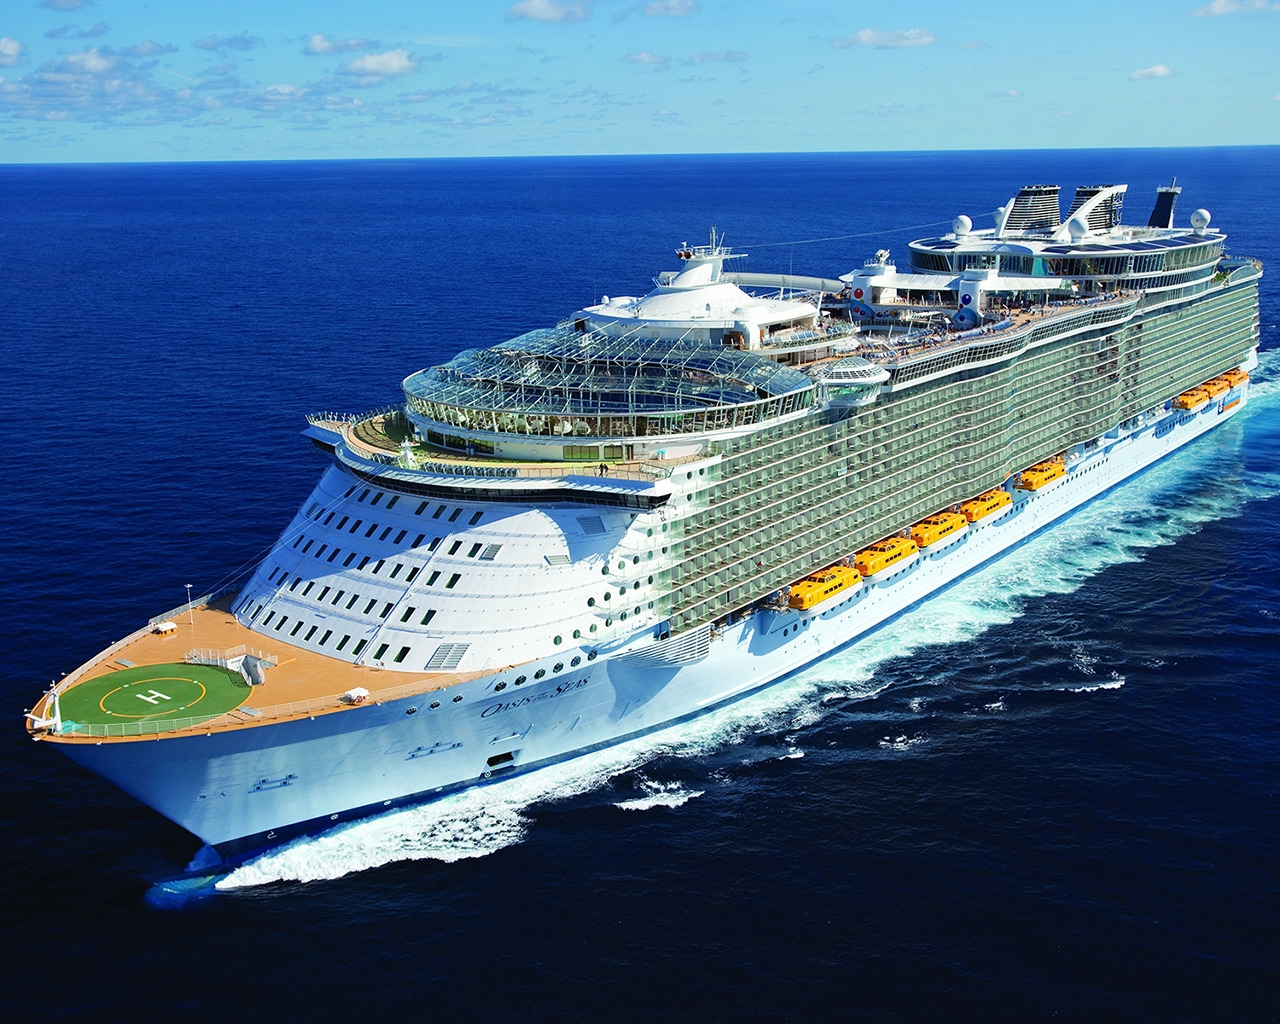 Oasis of the Seas for 1280 x 1024 resolution